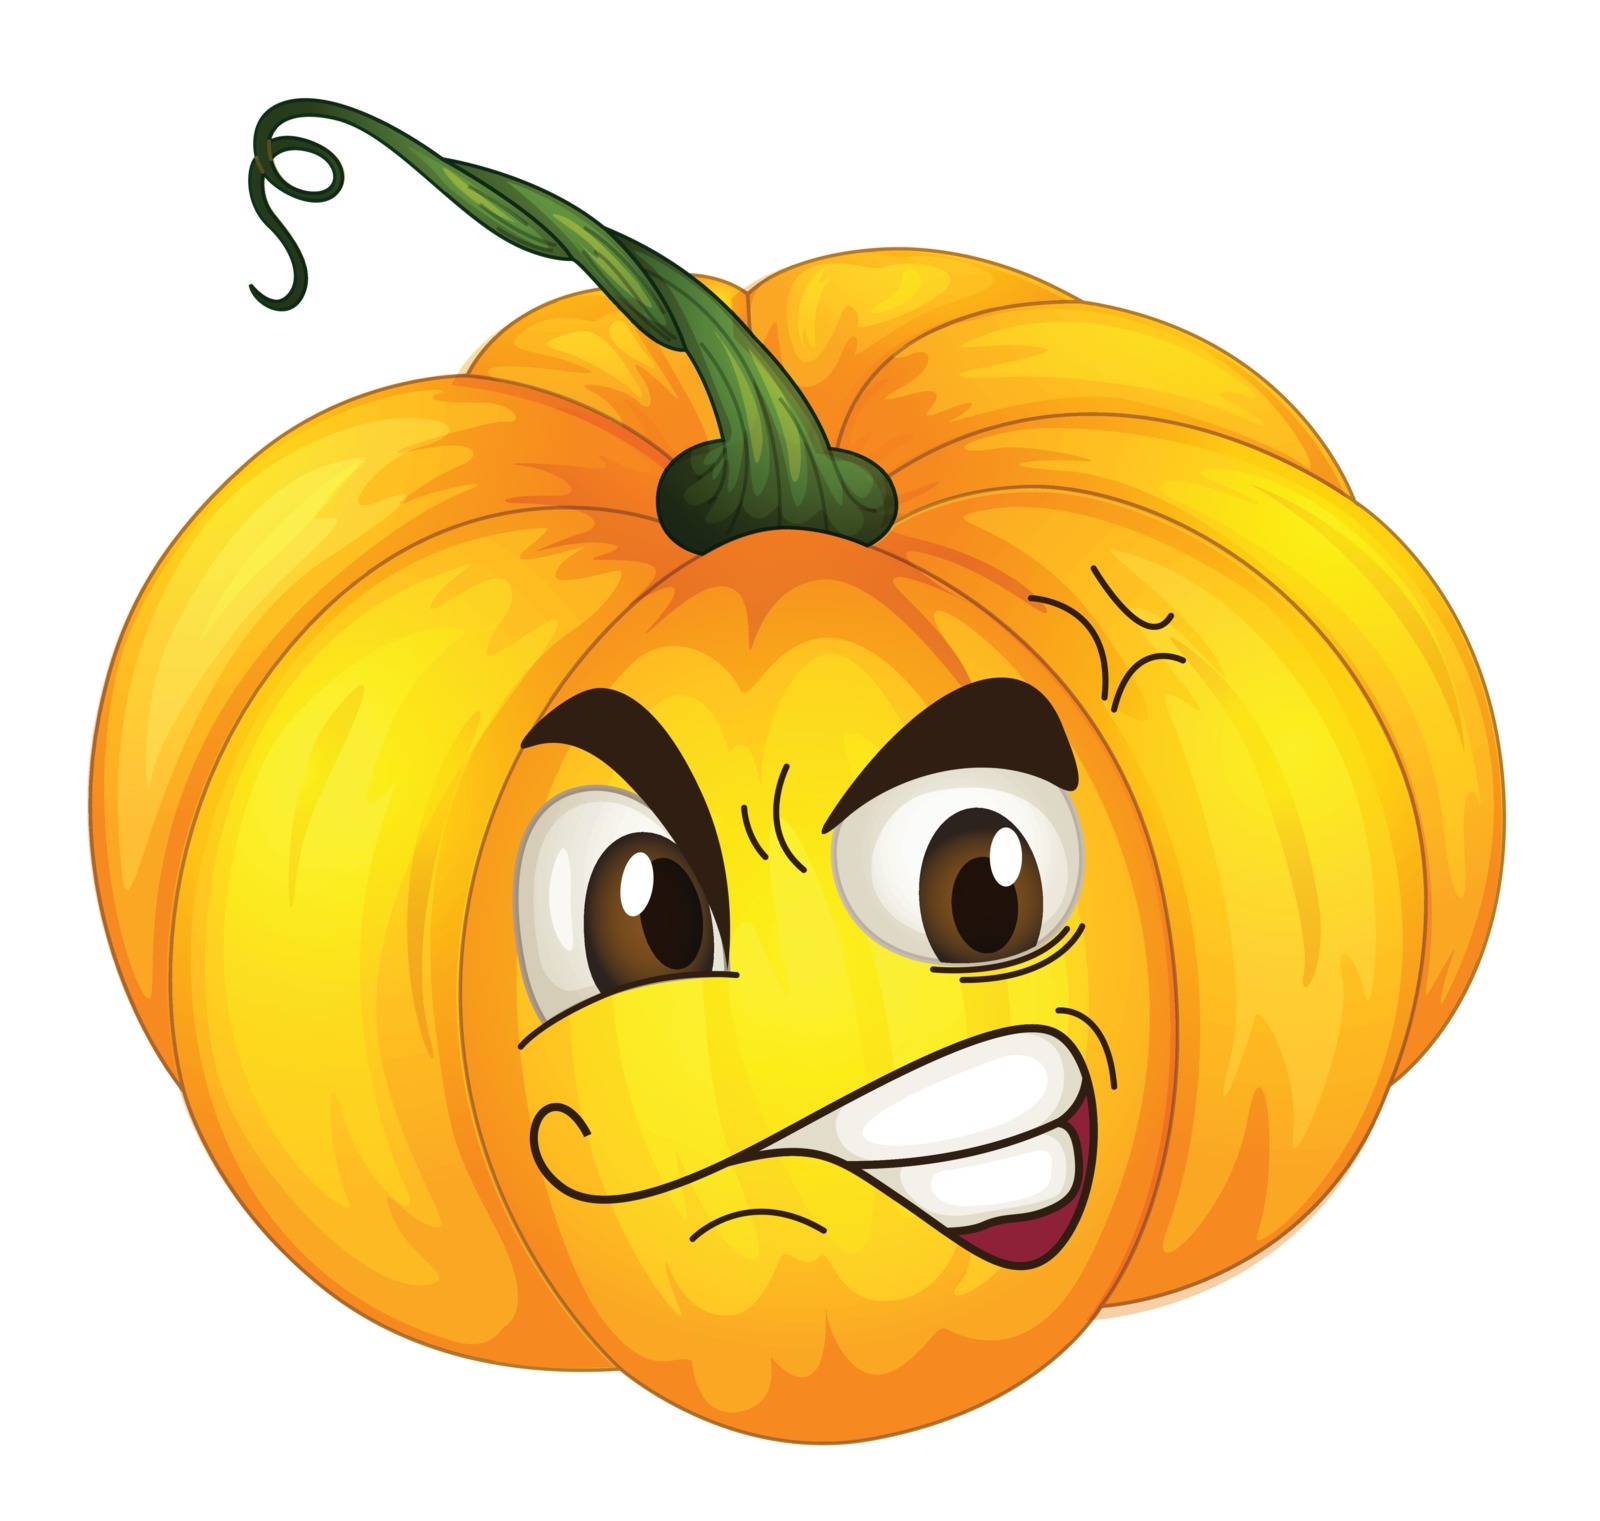 Illustration of an angry pumpkin